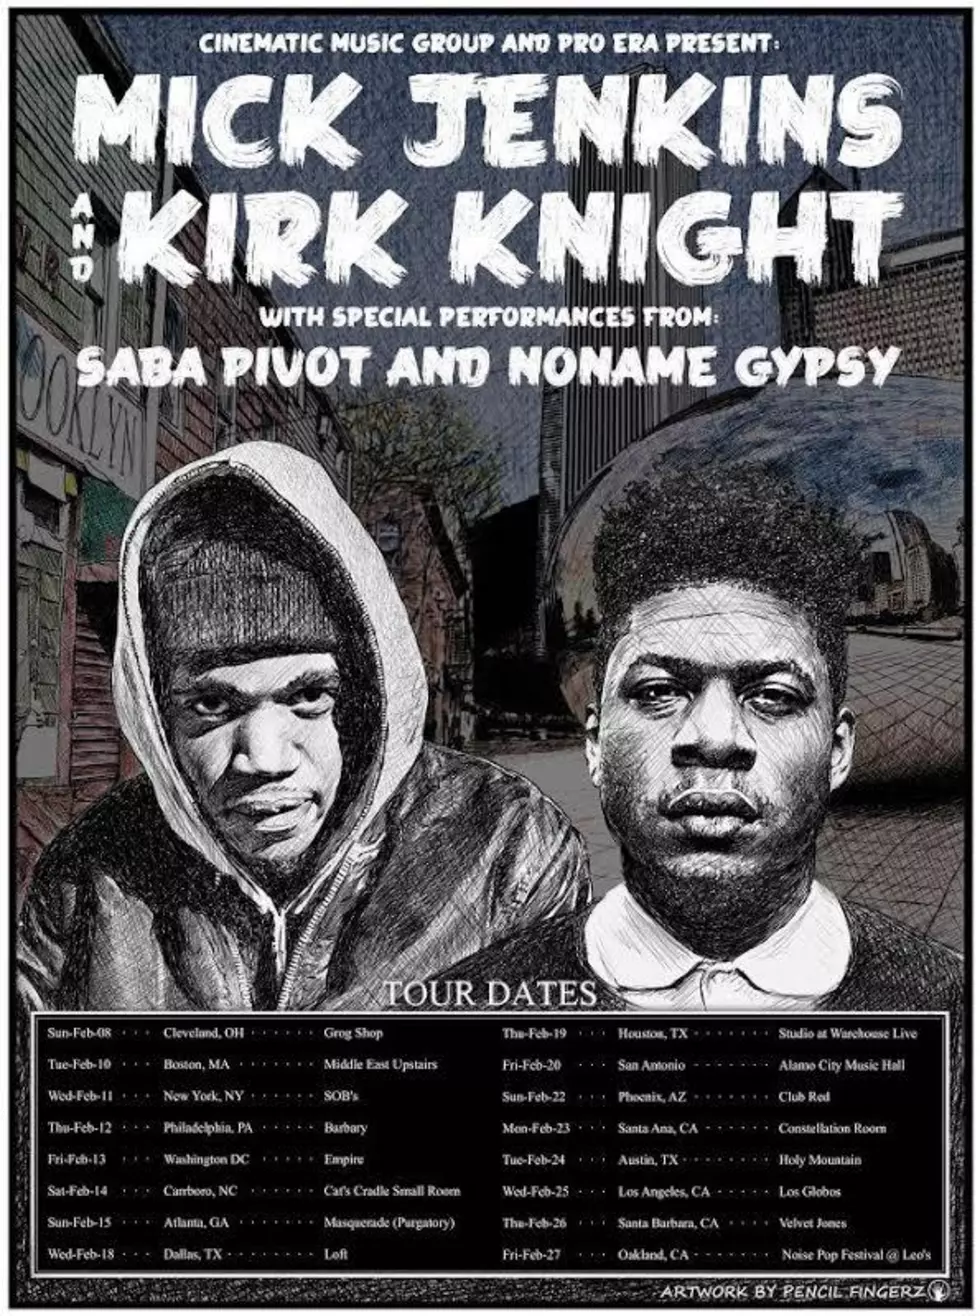 Mick Jenkins And Kirk Knight Are Going On Tour